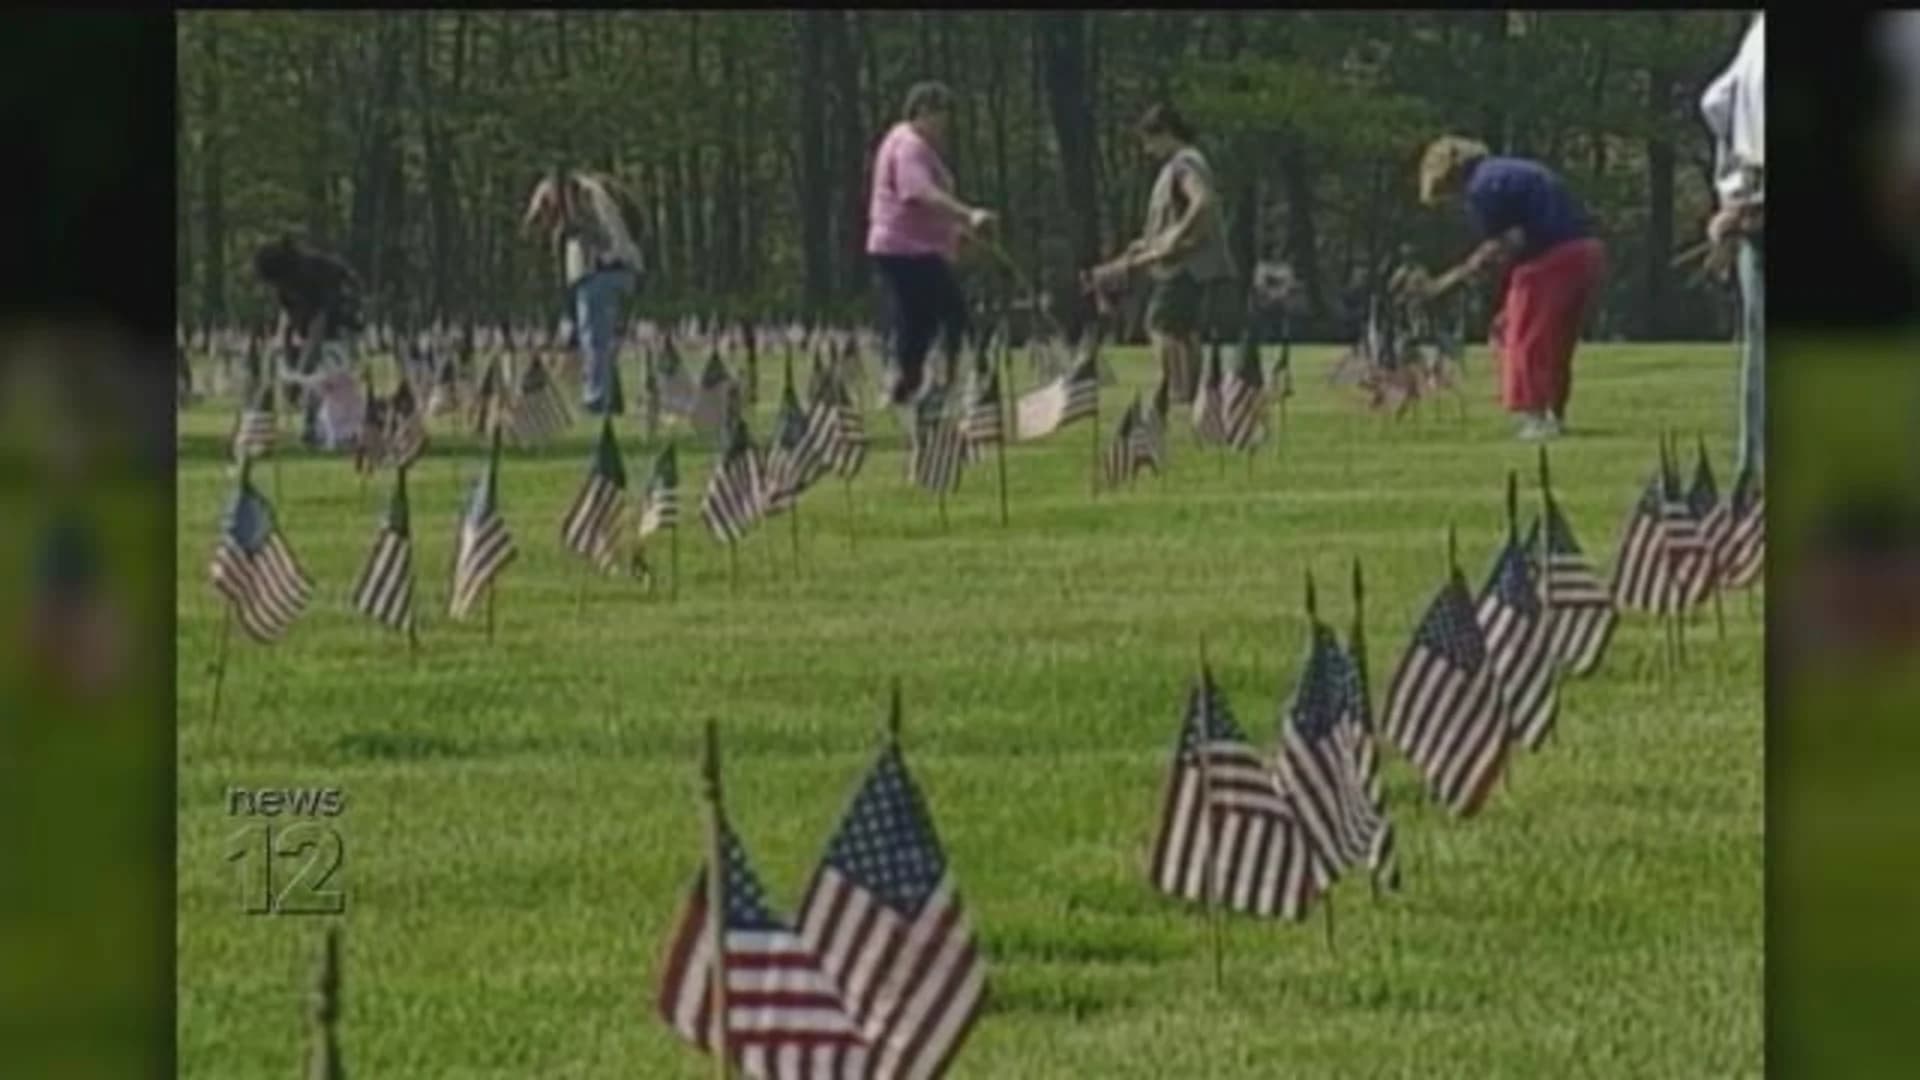 'We can do this safely.' - Bellone continues push for flag placement at Suffolk's national cemeteries